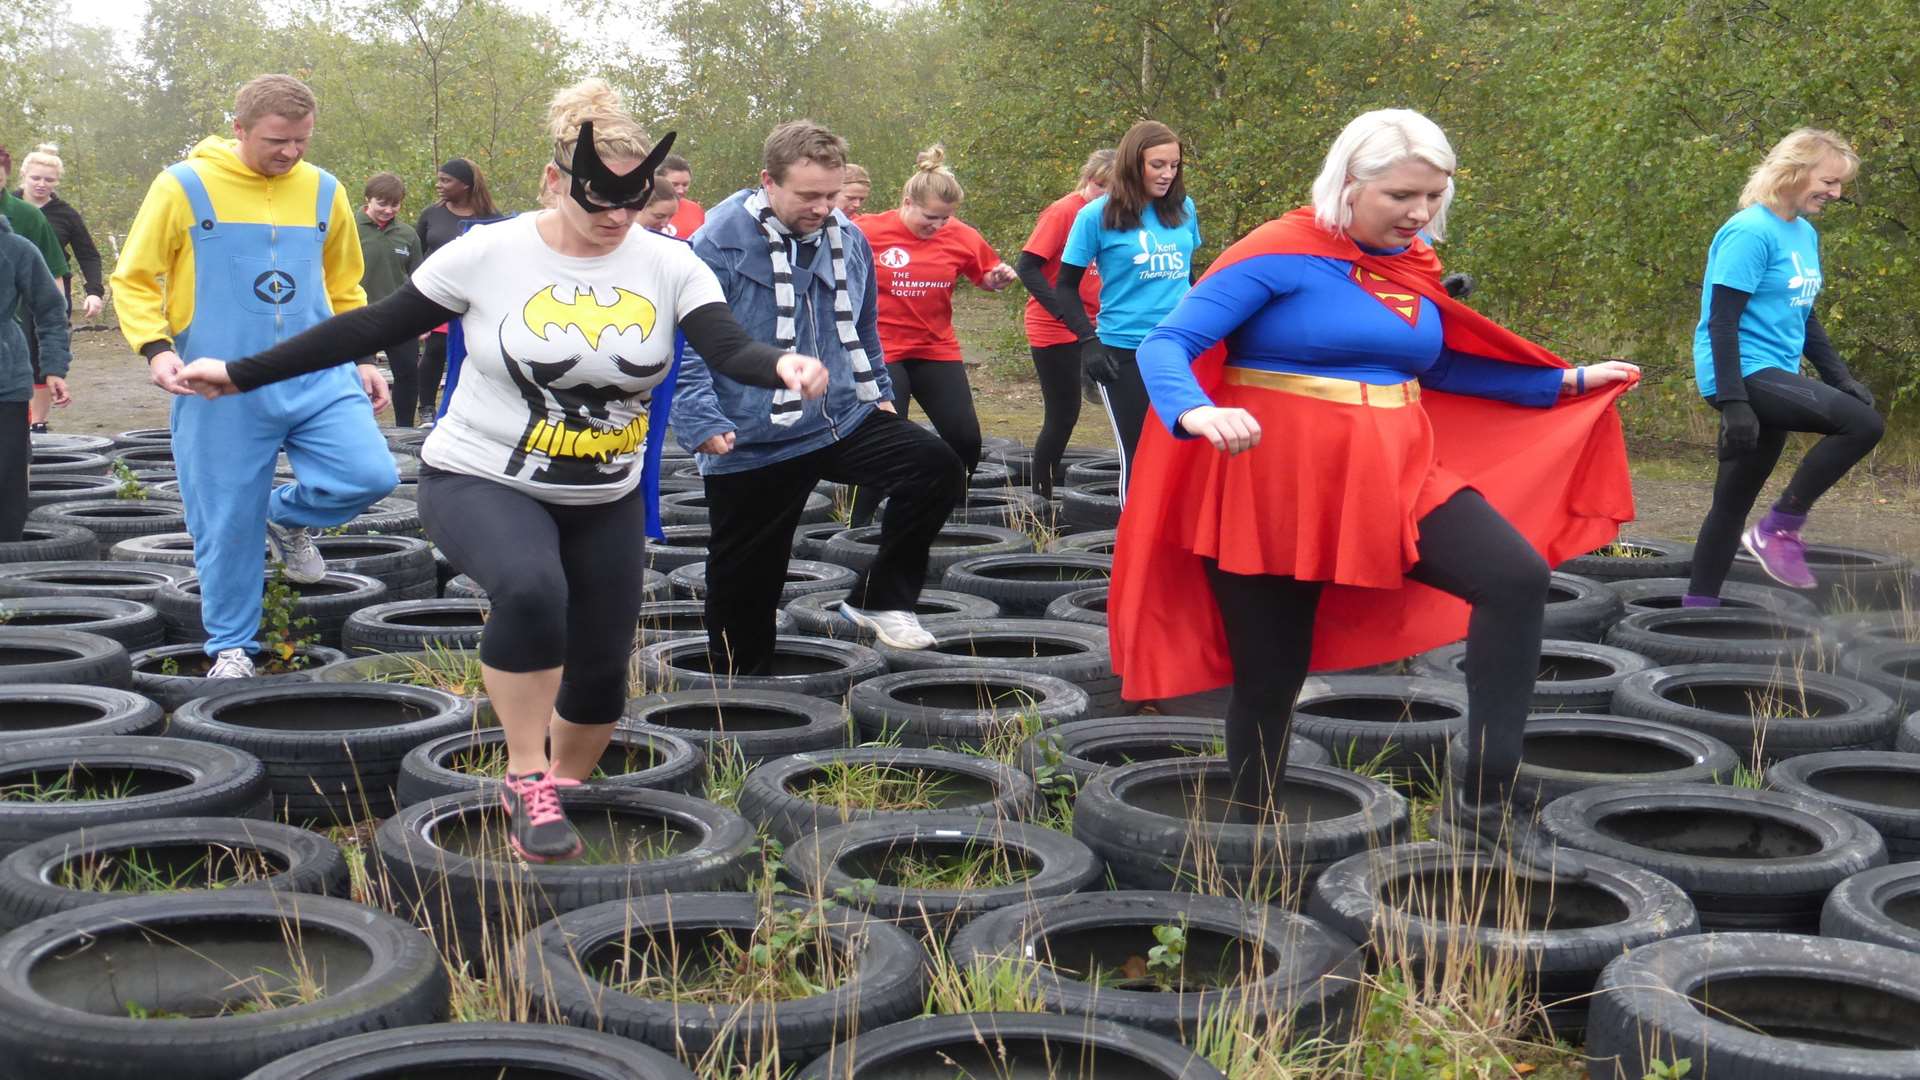 The Border Force team from Deal and Folkestone dressed as superheroes and raised funds for Help for Heroes.